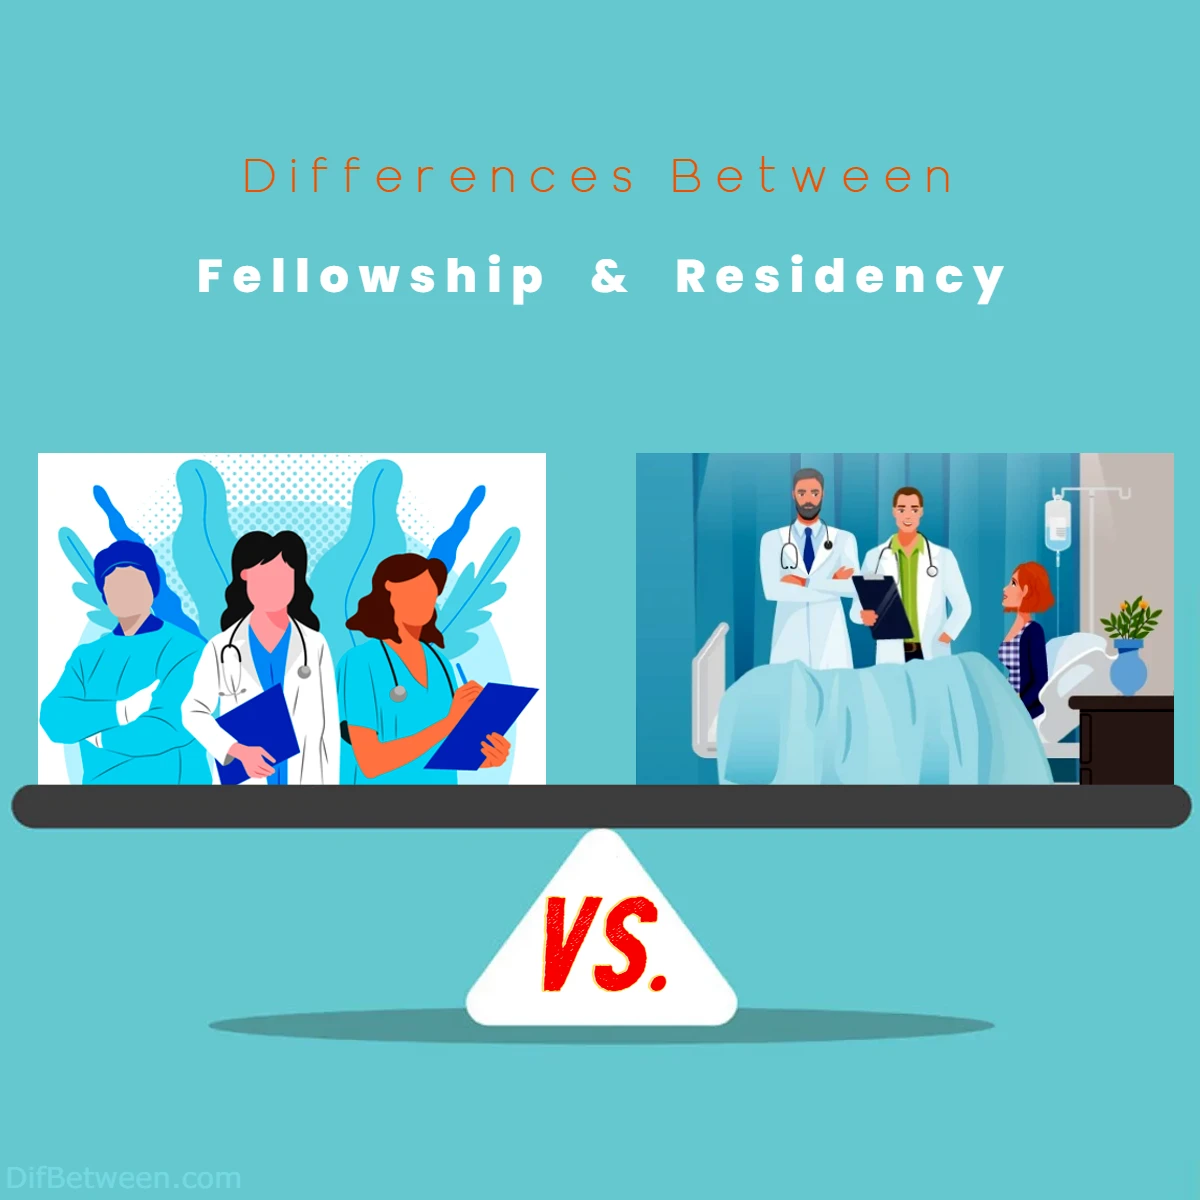 Differences Between Fellowship vs Residency